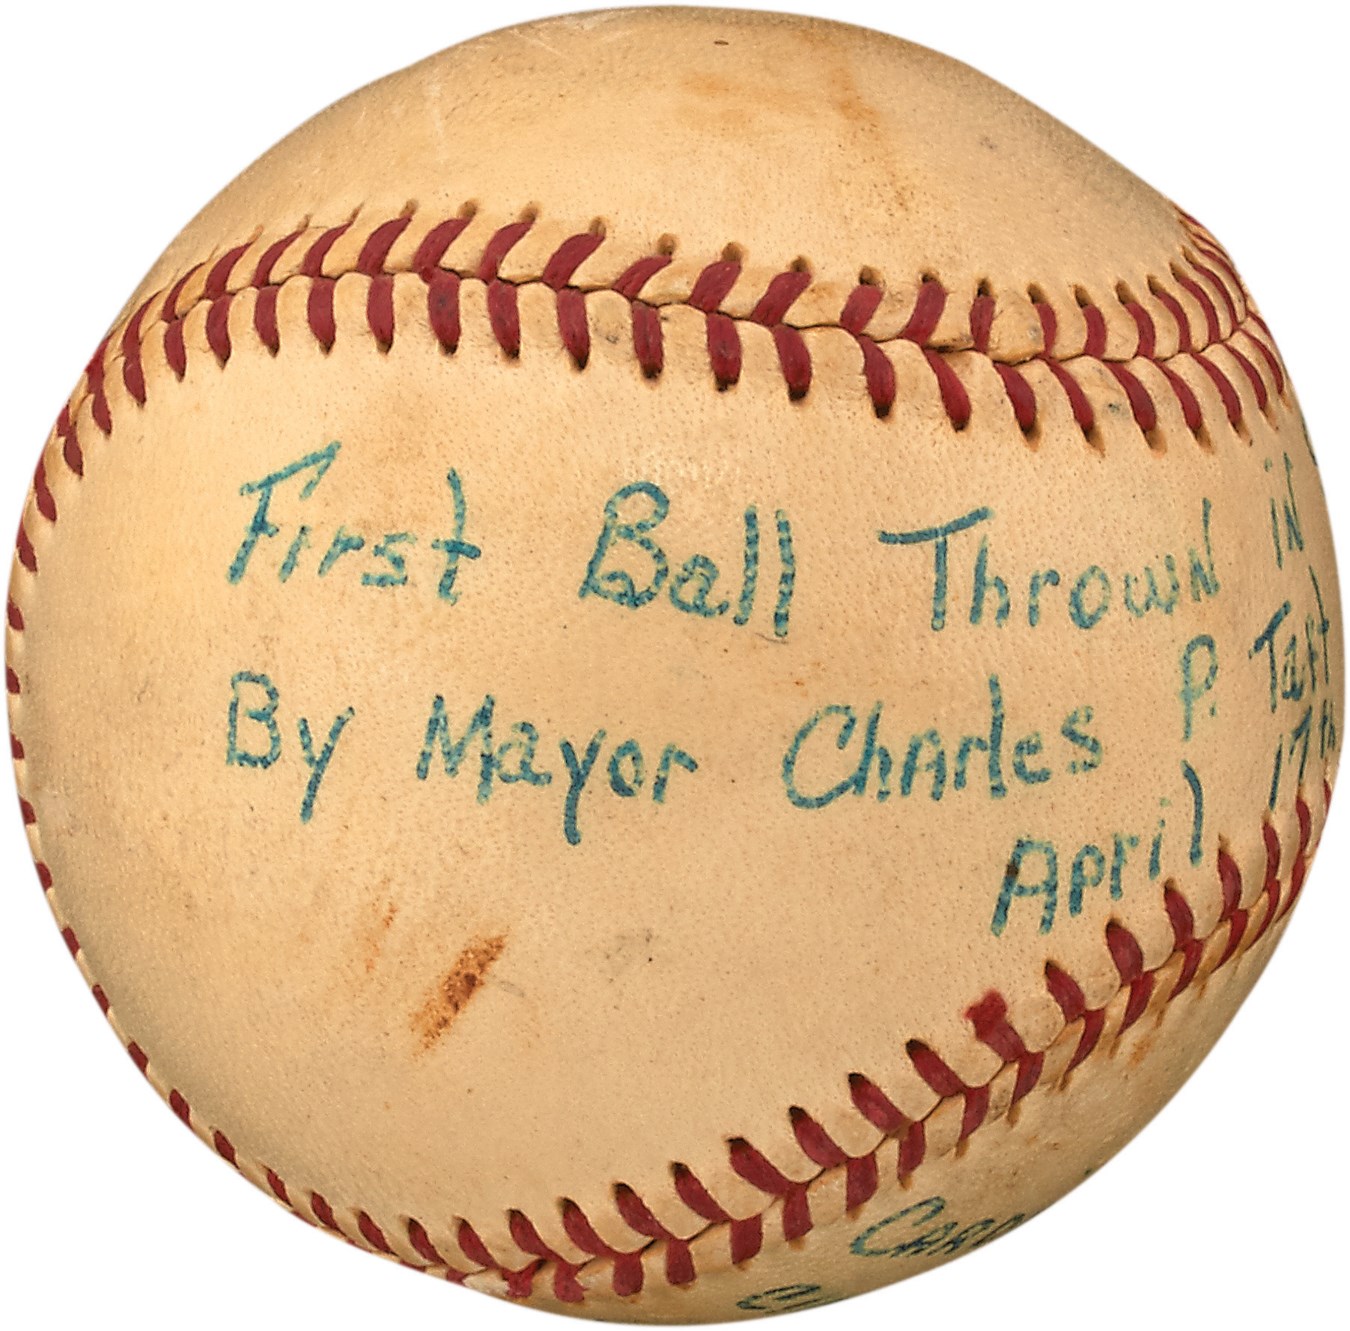 Pete Rose & Cincinnati Reds - 1956 Frank Robinson “Debut” First Pitch Baseball from MLer Hal R. Smith